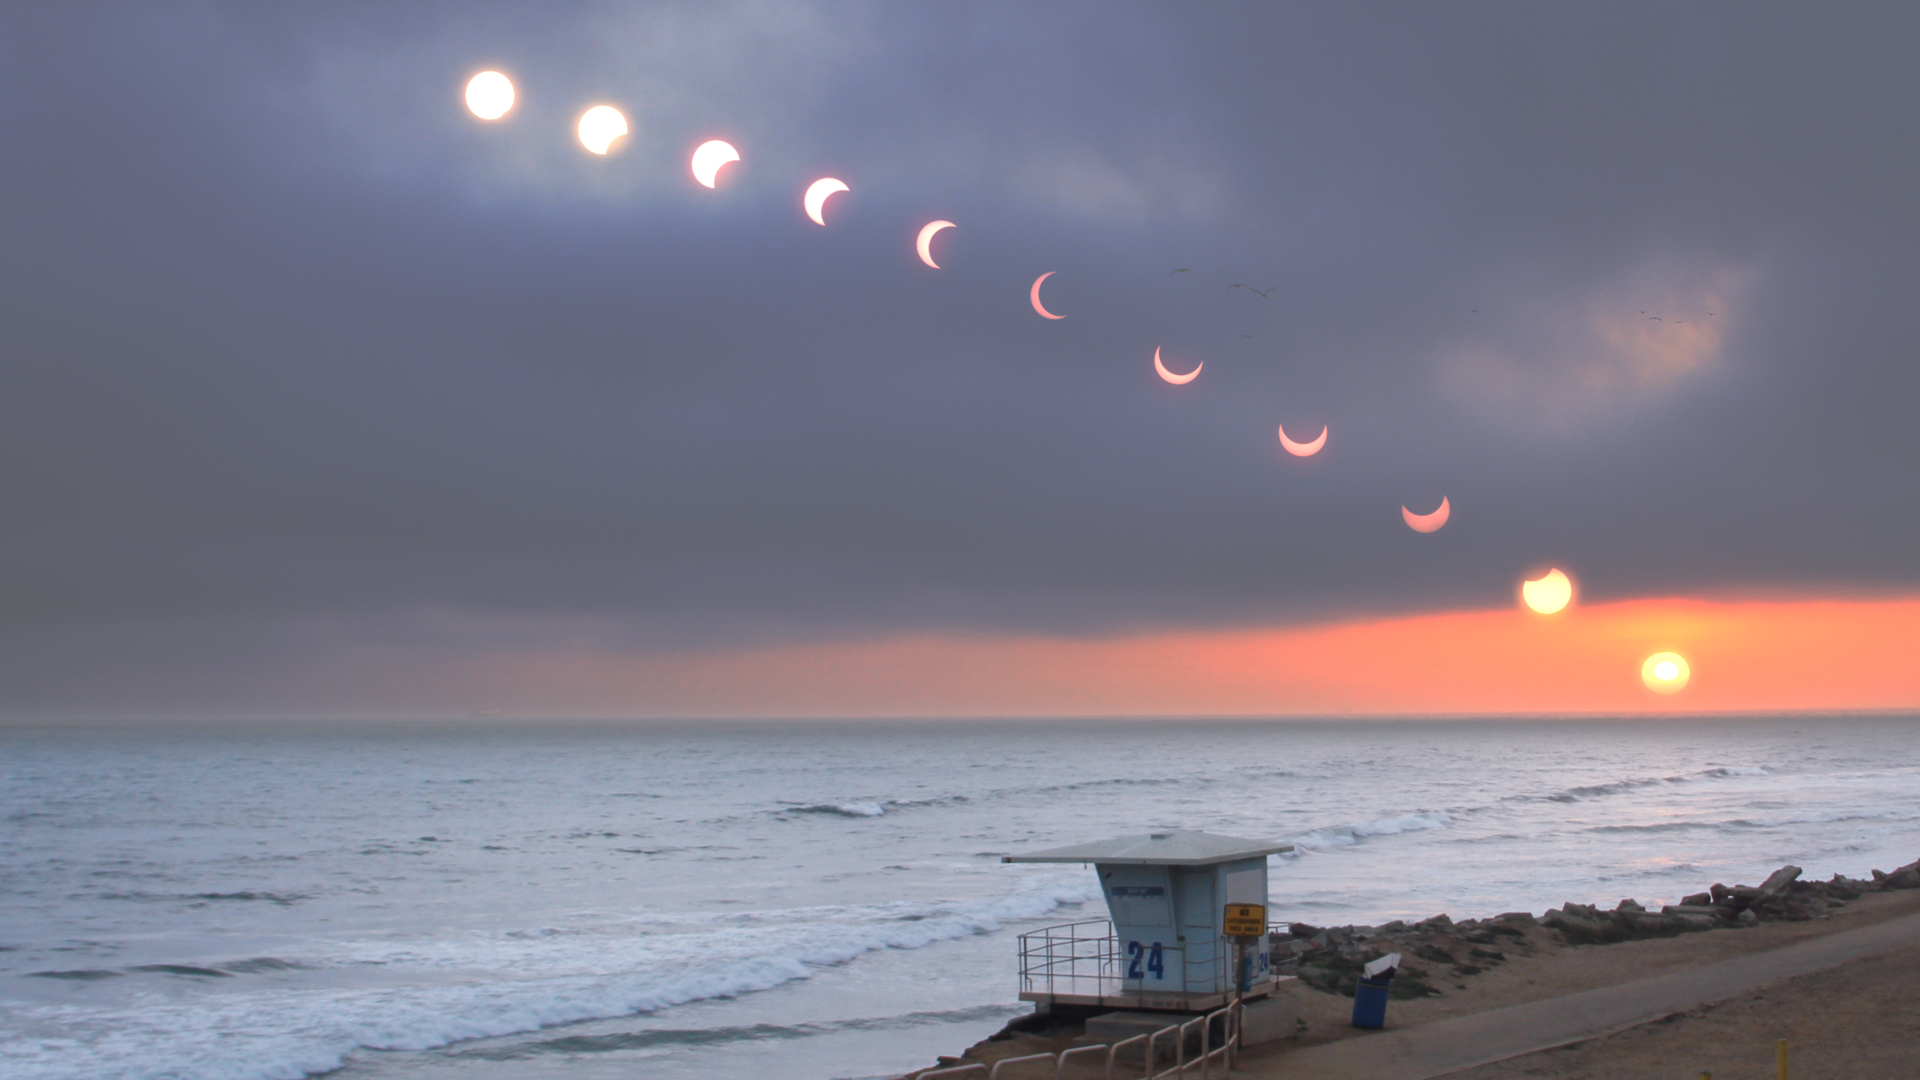 On May 20, 2012 the moon passed between the Sun and Earth. The partial eclipse was seen and time-lapse photographed near Huntington Beach, California. Photo by Jimnista via Flickr.